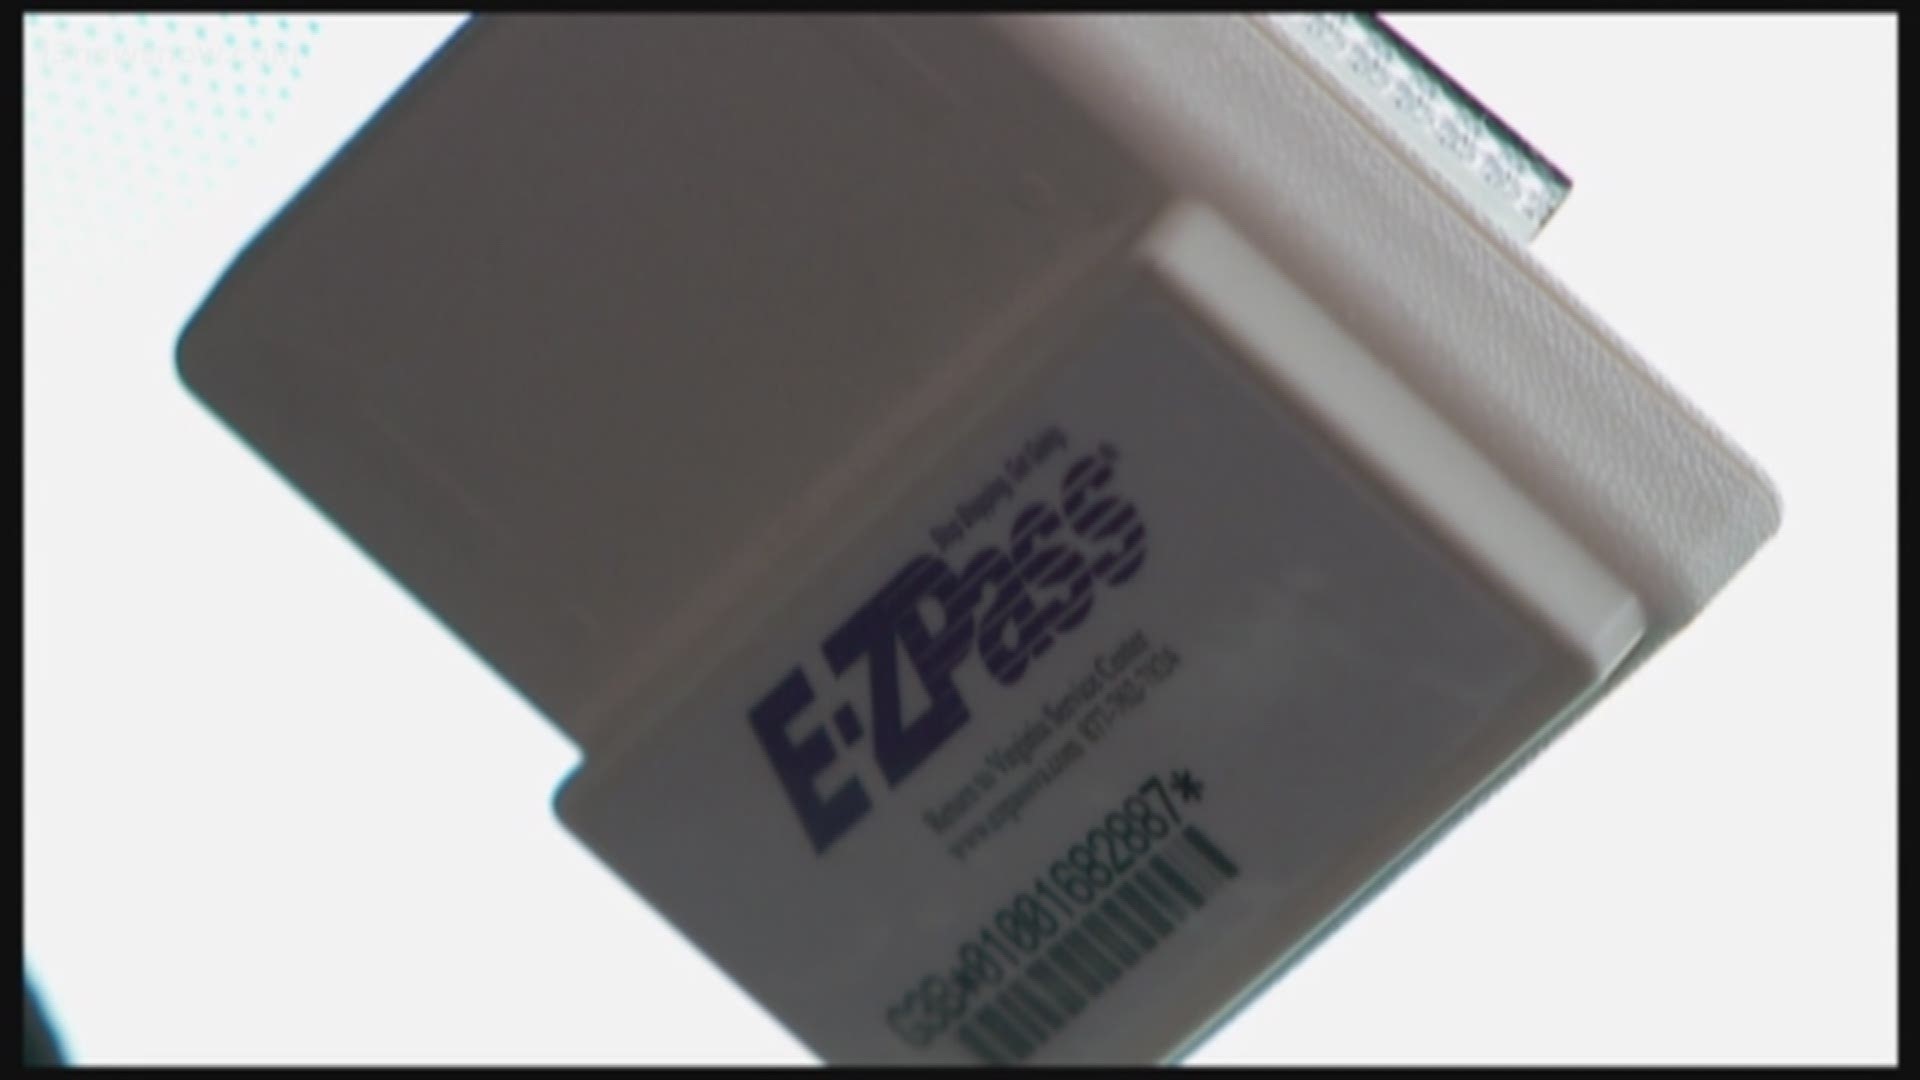 DriveERT is giving away more E-ZPasses to those of you who haven't gotten one yet and they'll already have $35 loaded on them.